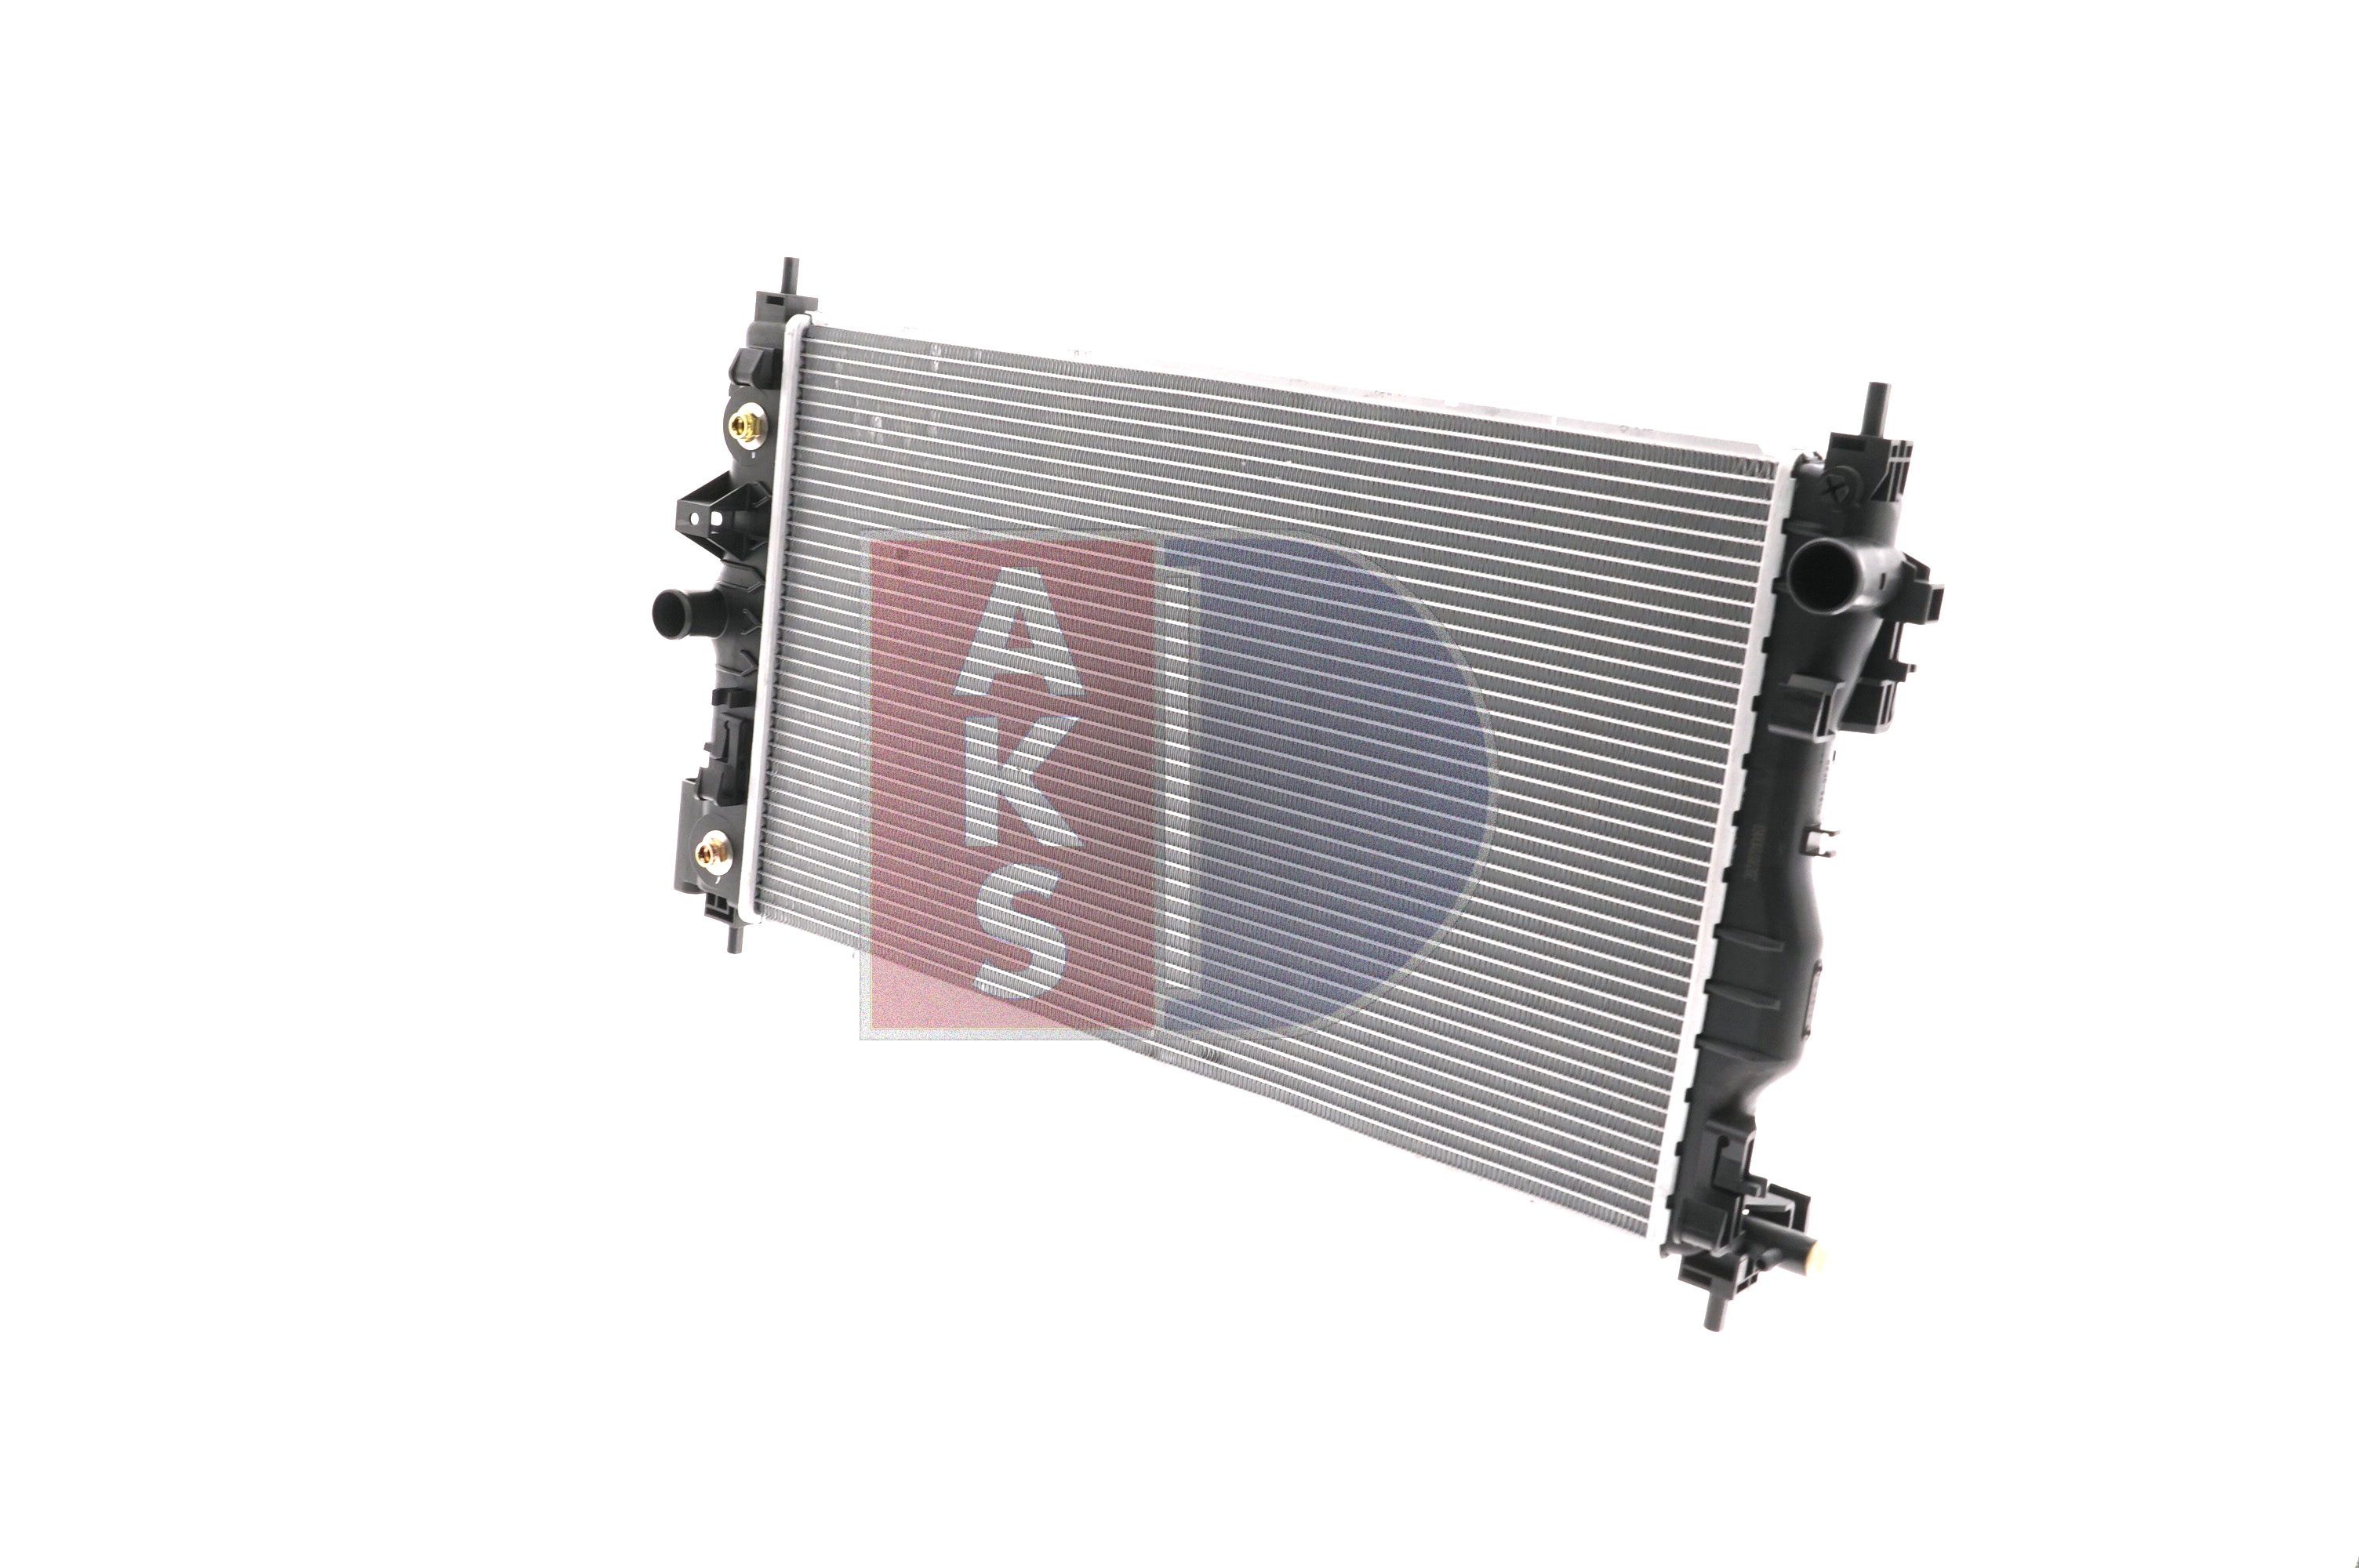 AKS DASIS 150116N Engine radiator Aluminium, for vehicles with/without air conditioning, 680 x 388 x 26 mm, Manual Transmission, Brazed cooling fins